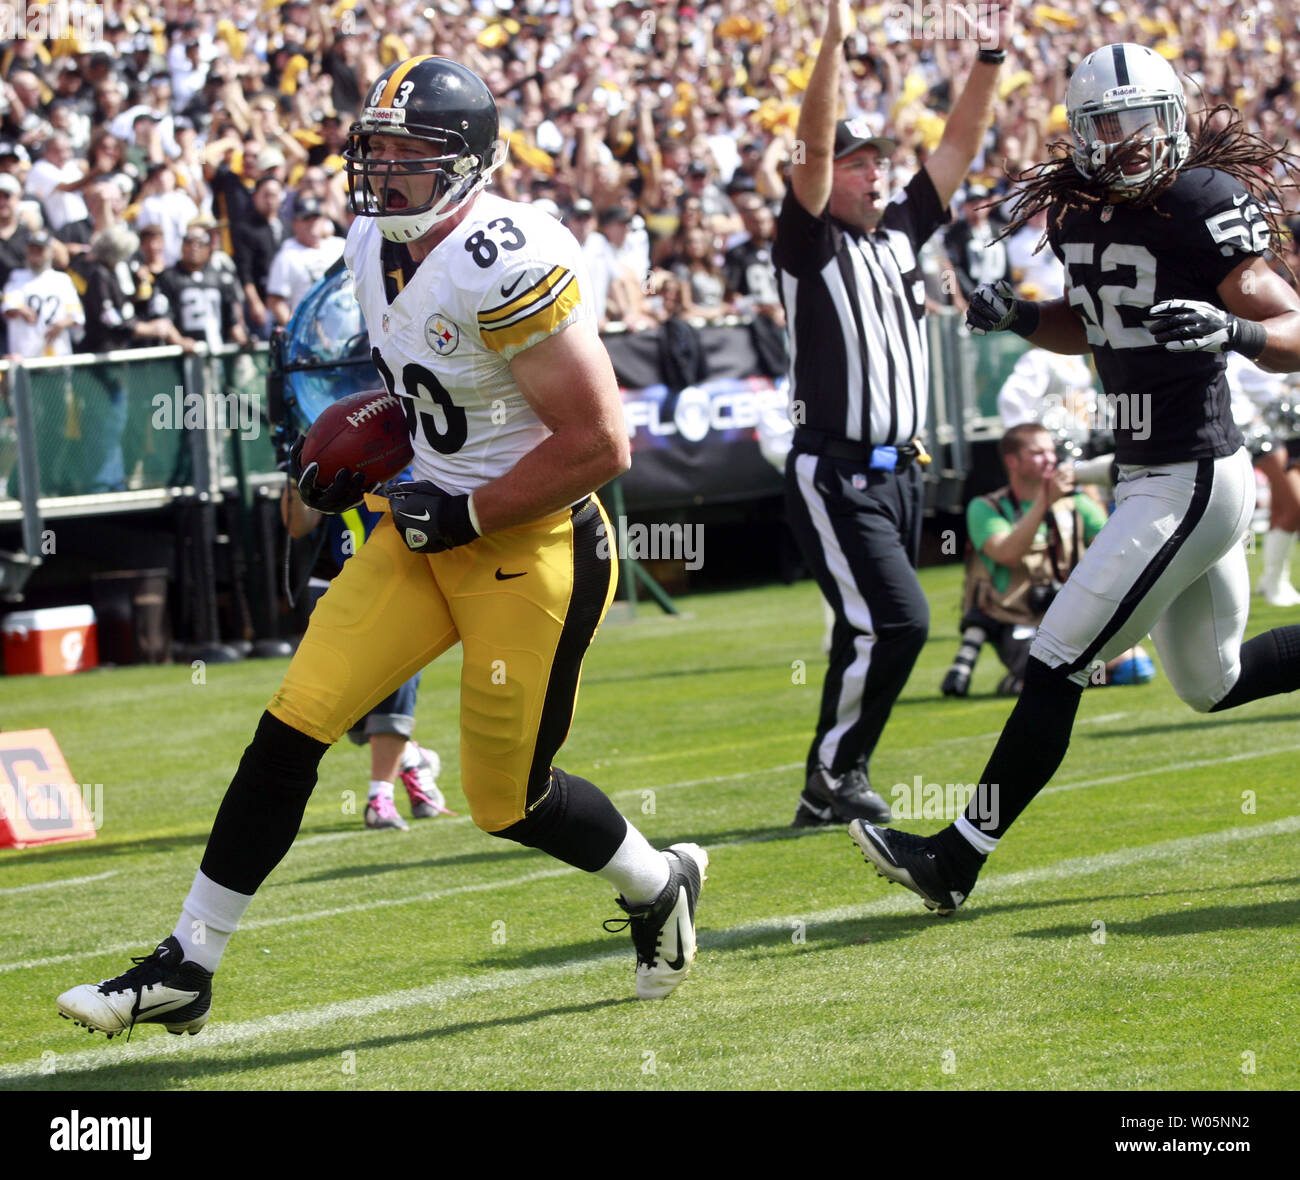 Pittsburg Steelers TE Heath Miller shouts after catching a pass from Ben Roethlisberger and running 4 yds for a first quarter touchdown chased by Oakland Raiders LB Philip Wheeler at O.co Coliseum in Oakland, California on September 23, 2012.   Raiders defeated the Steelers 34-31.      UPI/Bruce Gordon Stock Photo